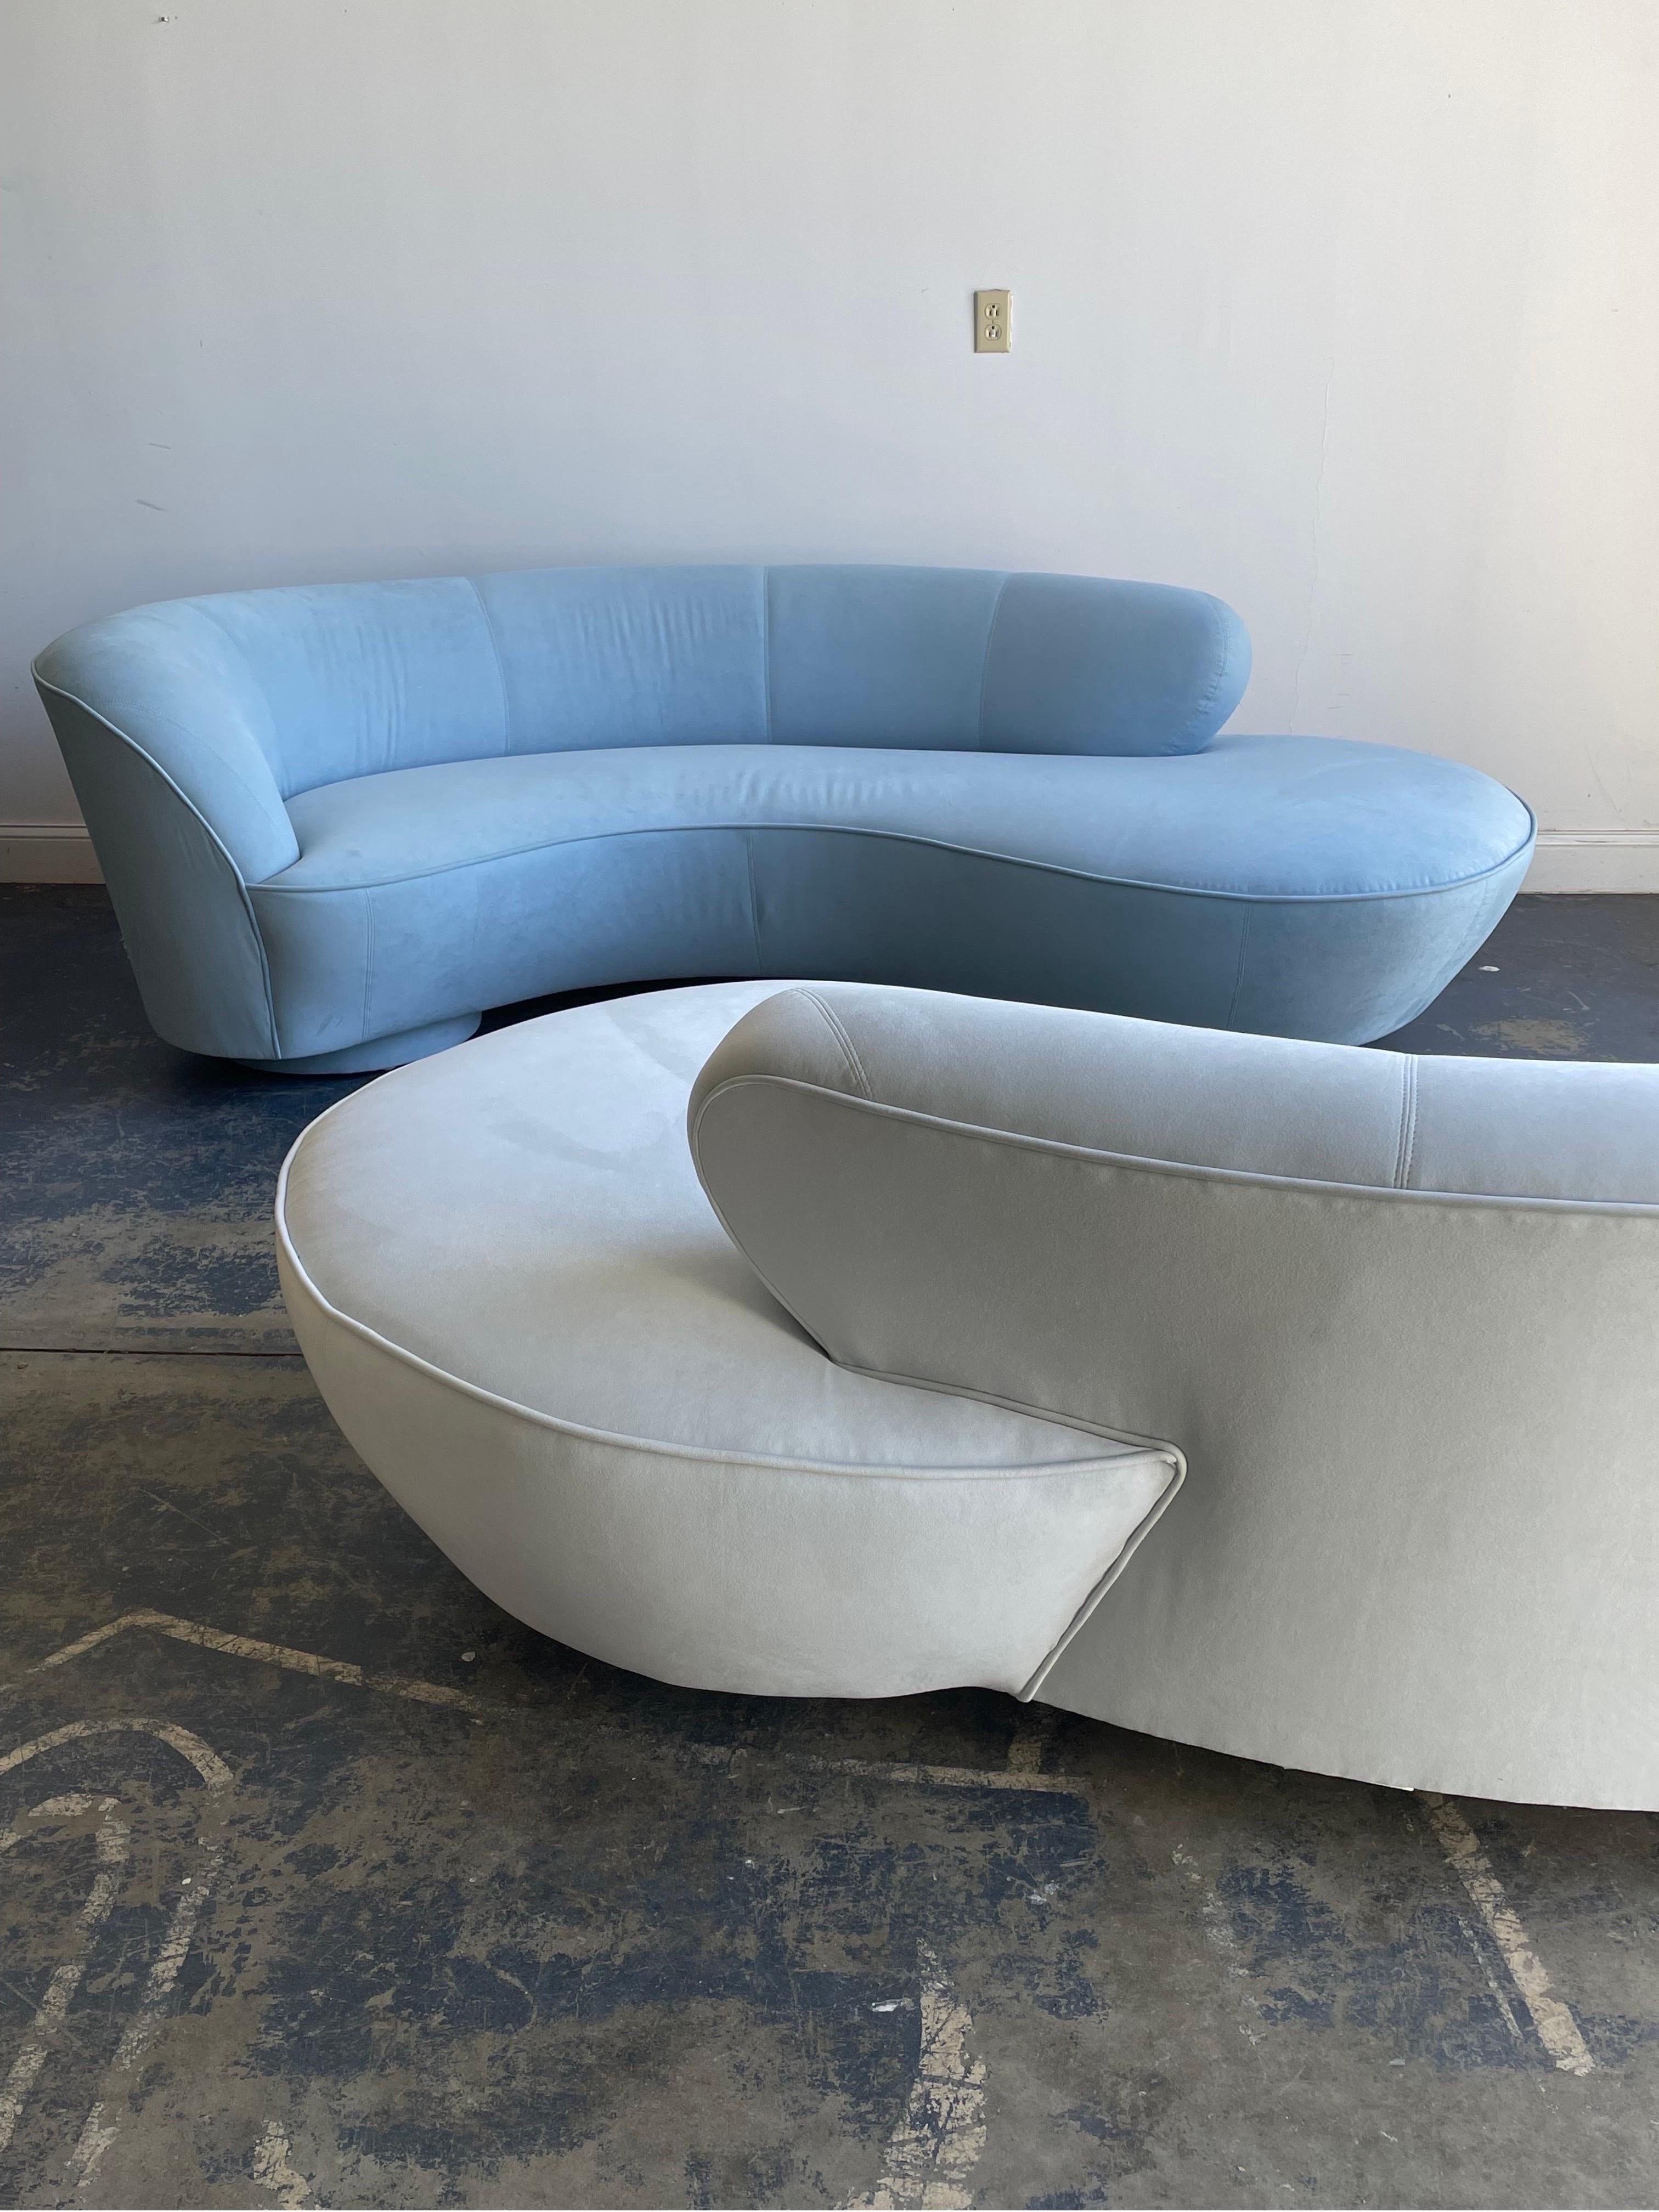 Pair of Opposing and Complimentary sofas designed by Vladimir Kagan for Directional. Sofas are in their original upholstery and were ordered together in complimenting colors. Please note the lighter one also has a slight blue hue. 

Vladimir Kagan